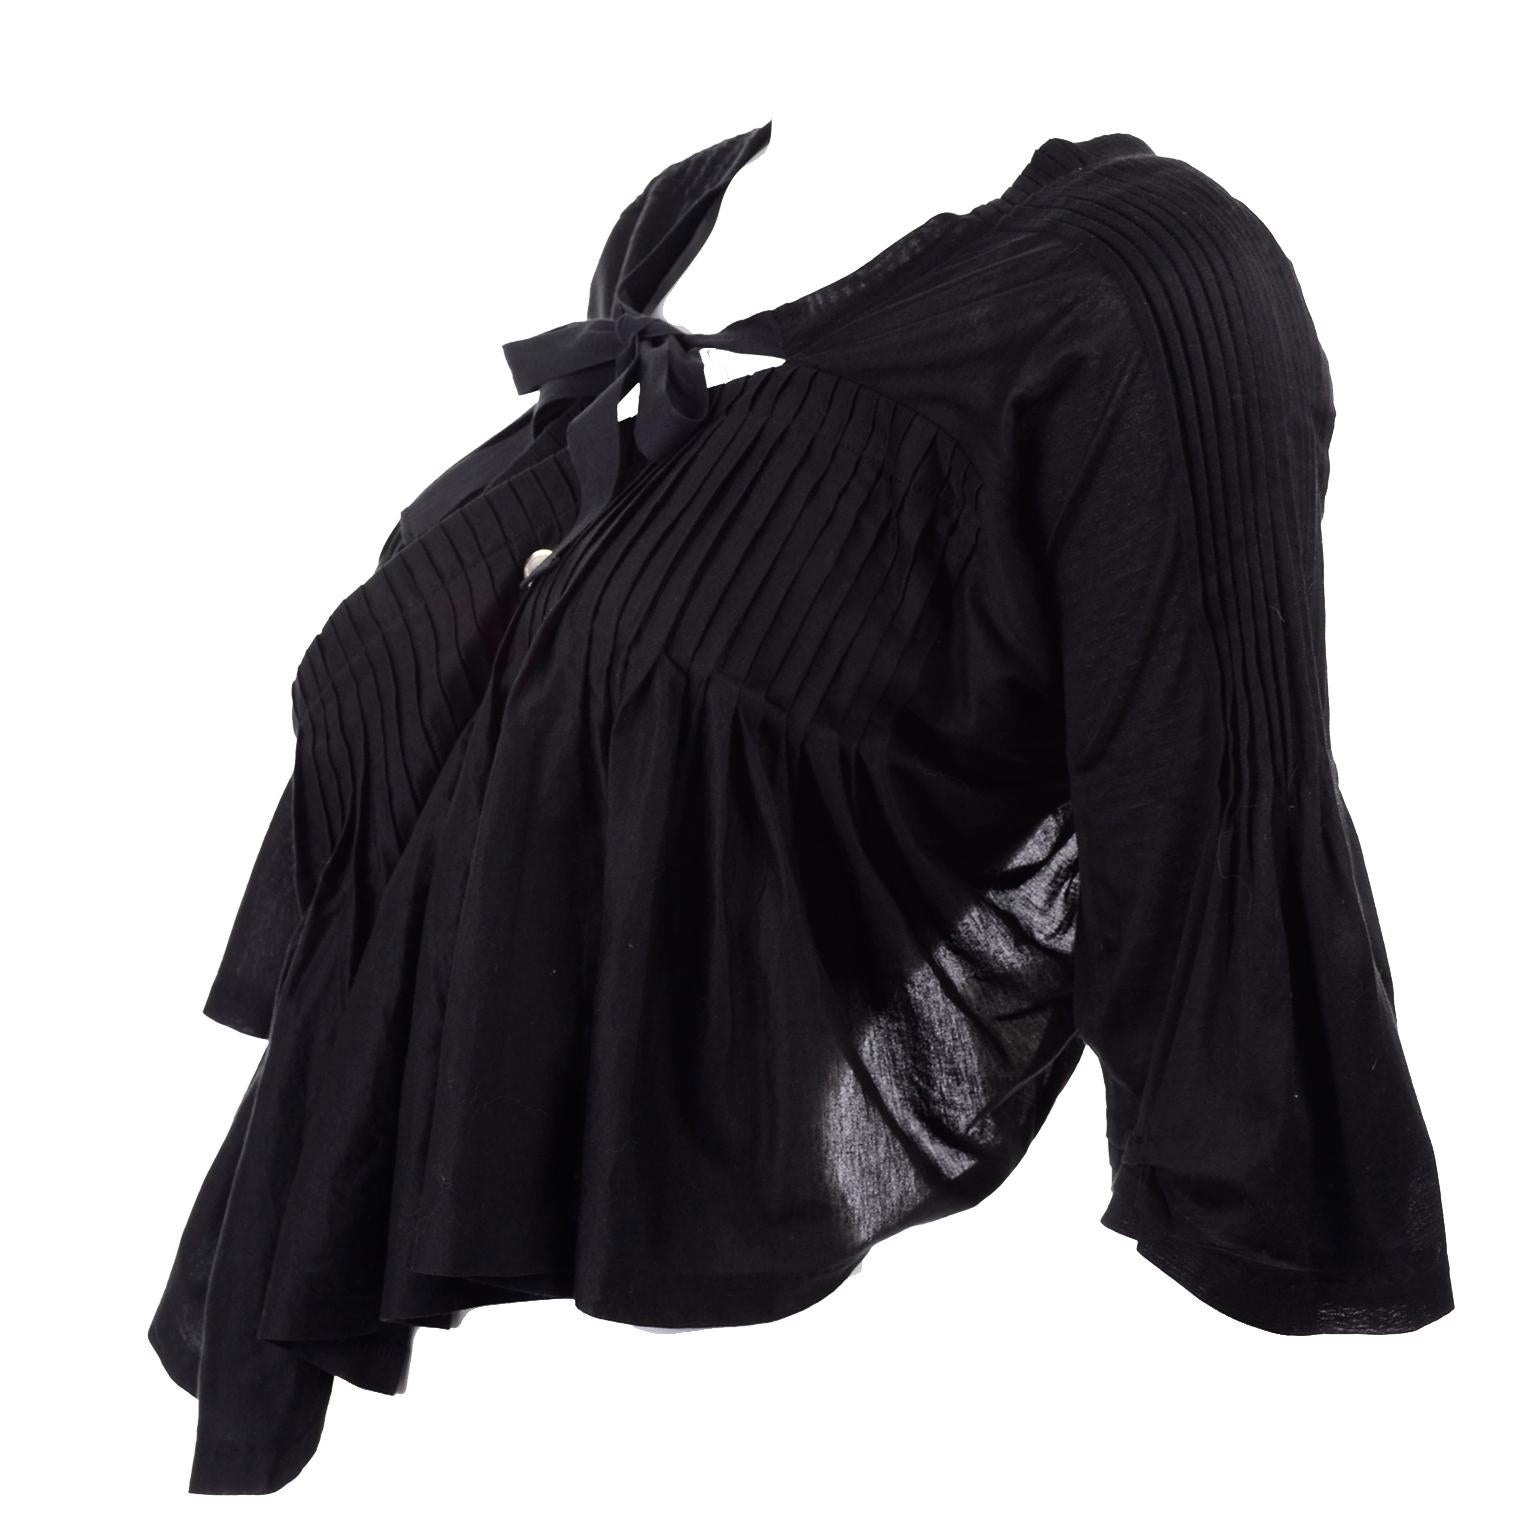 This is a fabulous top from Comme des Garcons with the original $1065 price tag and all other tags still attached . Purchased at Barney's, this avant garde top has an open back, beautiful pleats & tucks, and is in a poncho style with 3/4 length